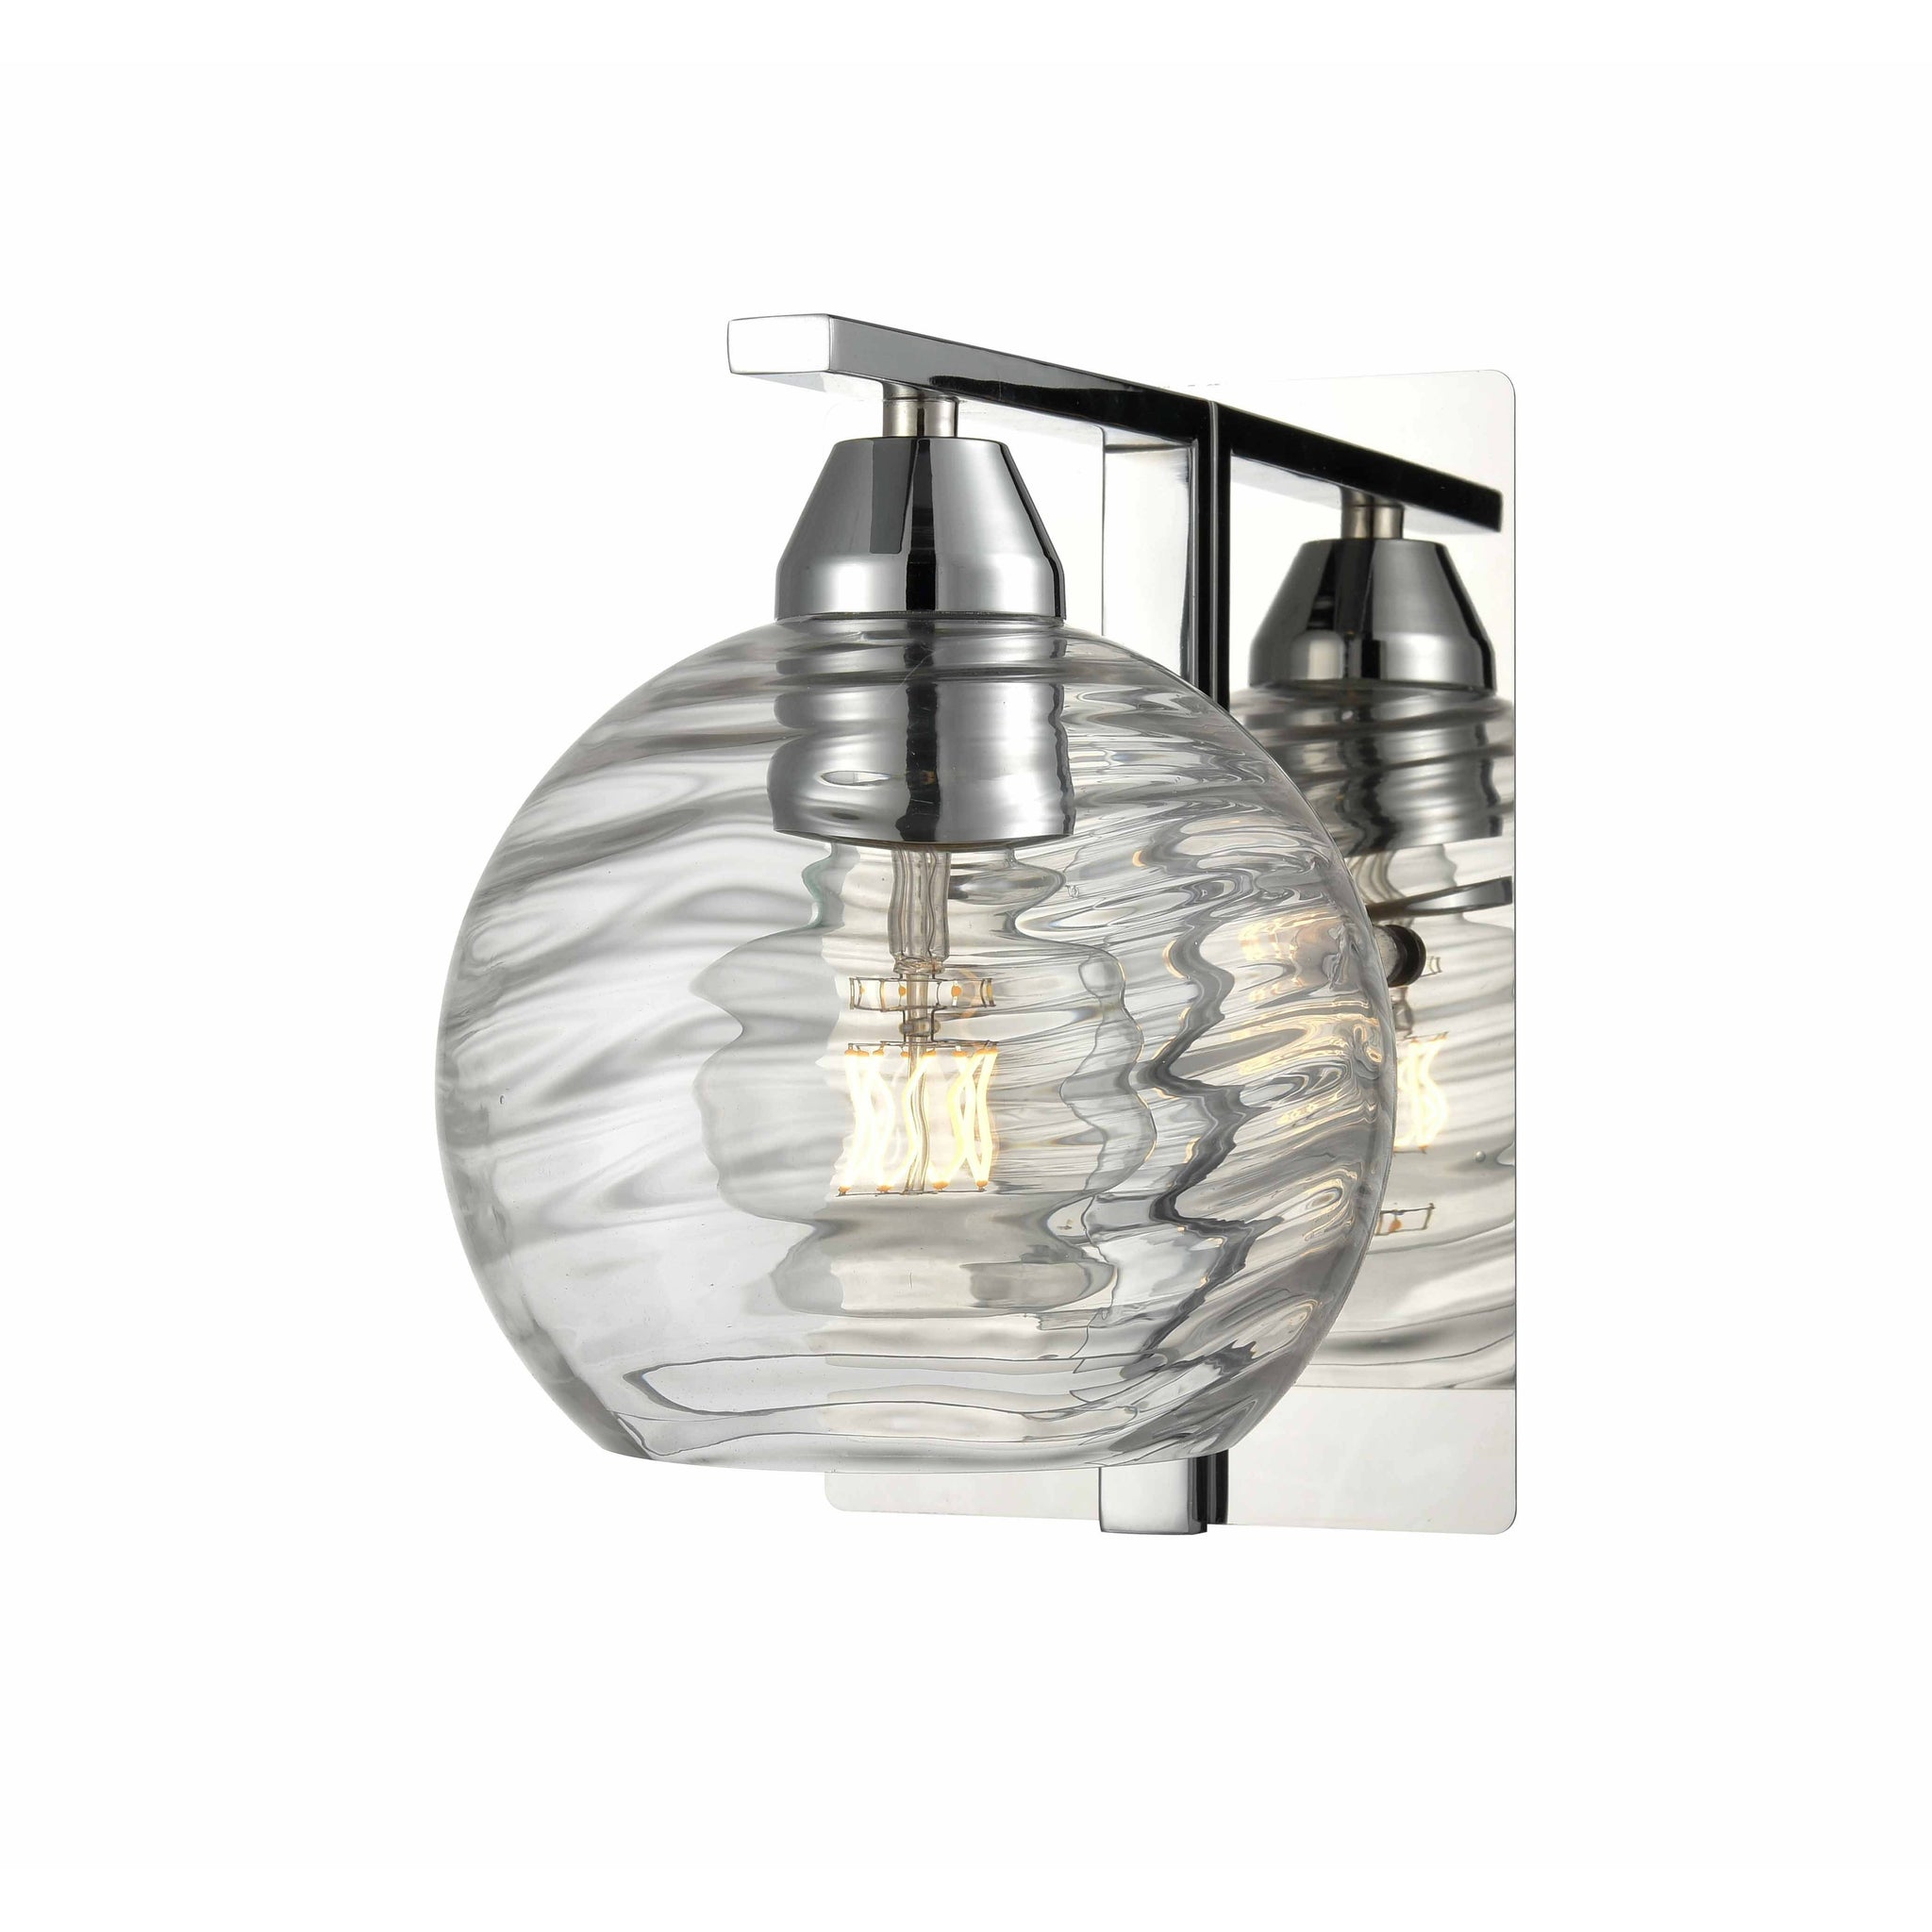 Tropea Sconce Chrome with Ripple Glass